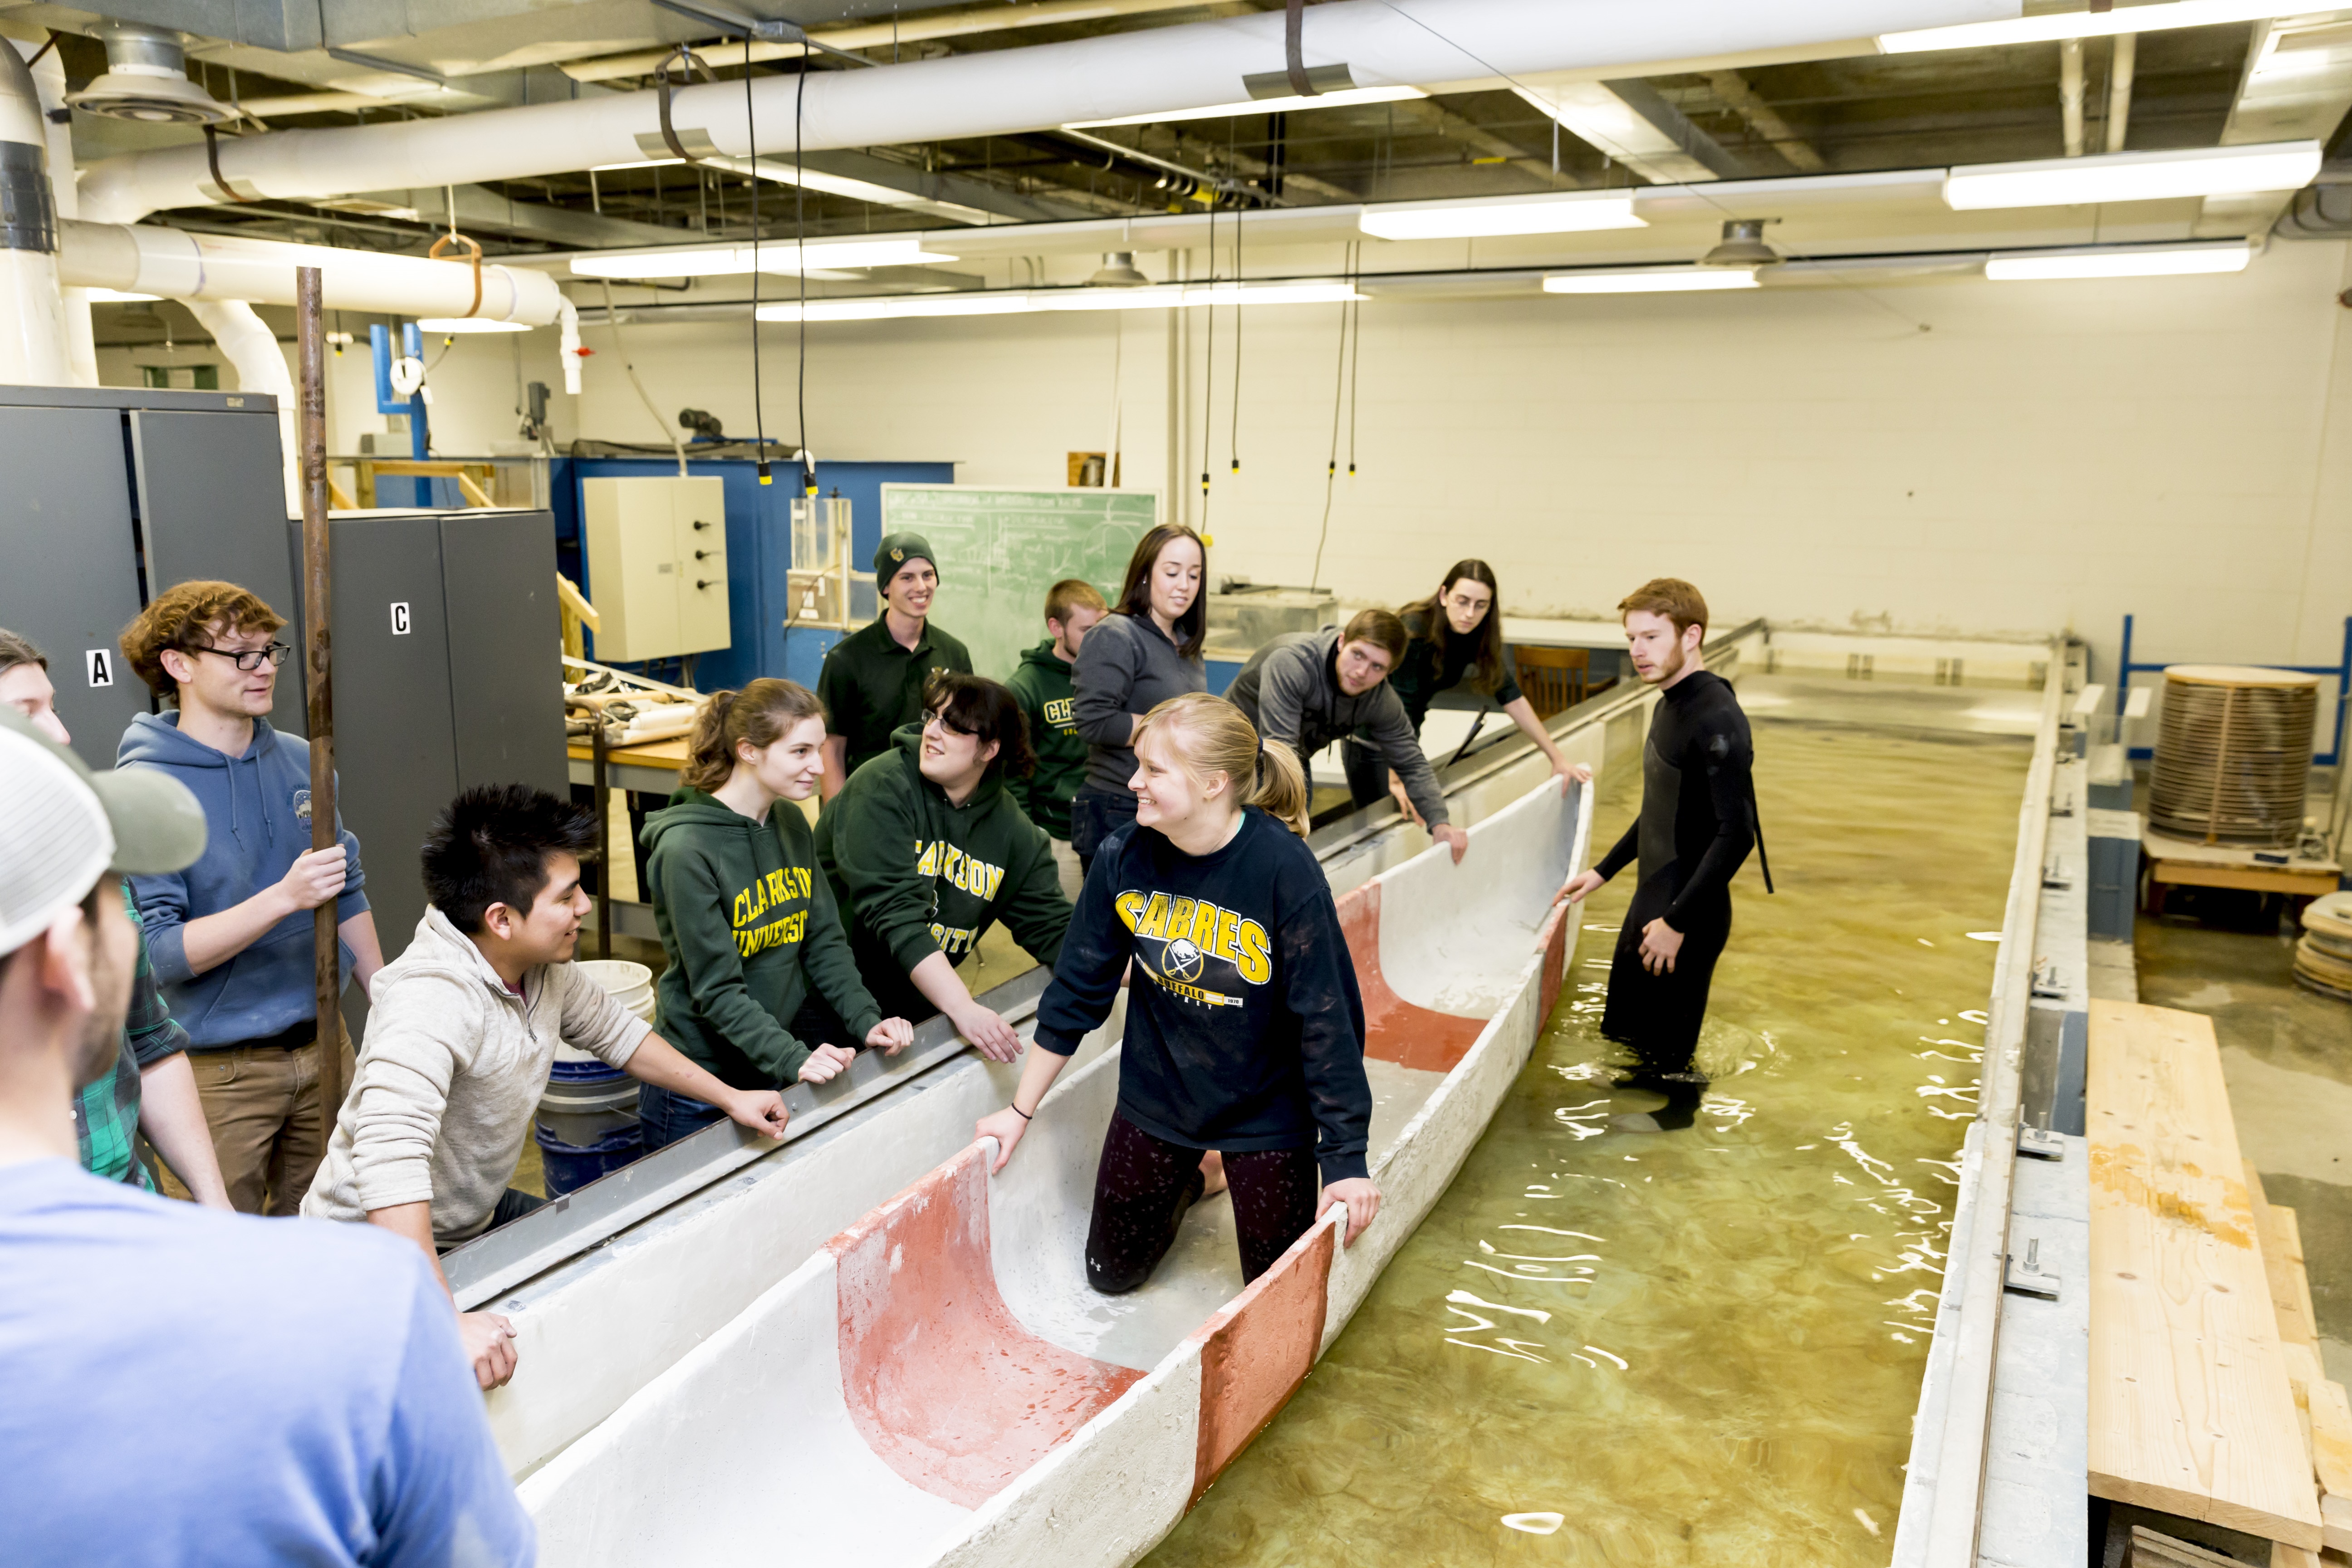 Students sitting in the concrete canoe that is in a water bath